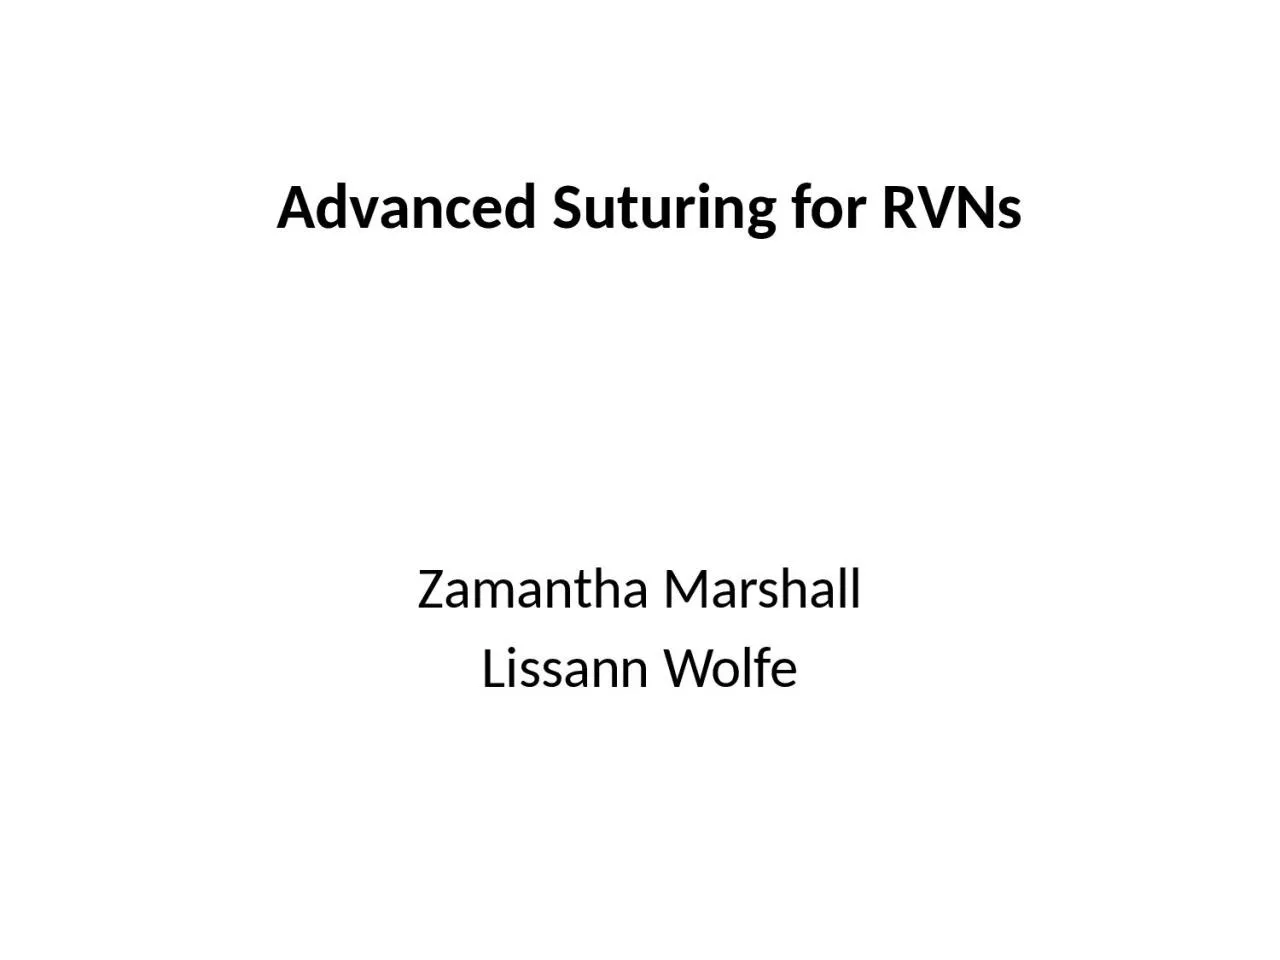 Advanced Suturing for RVNs